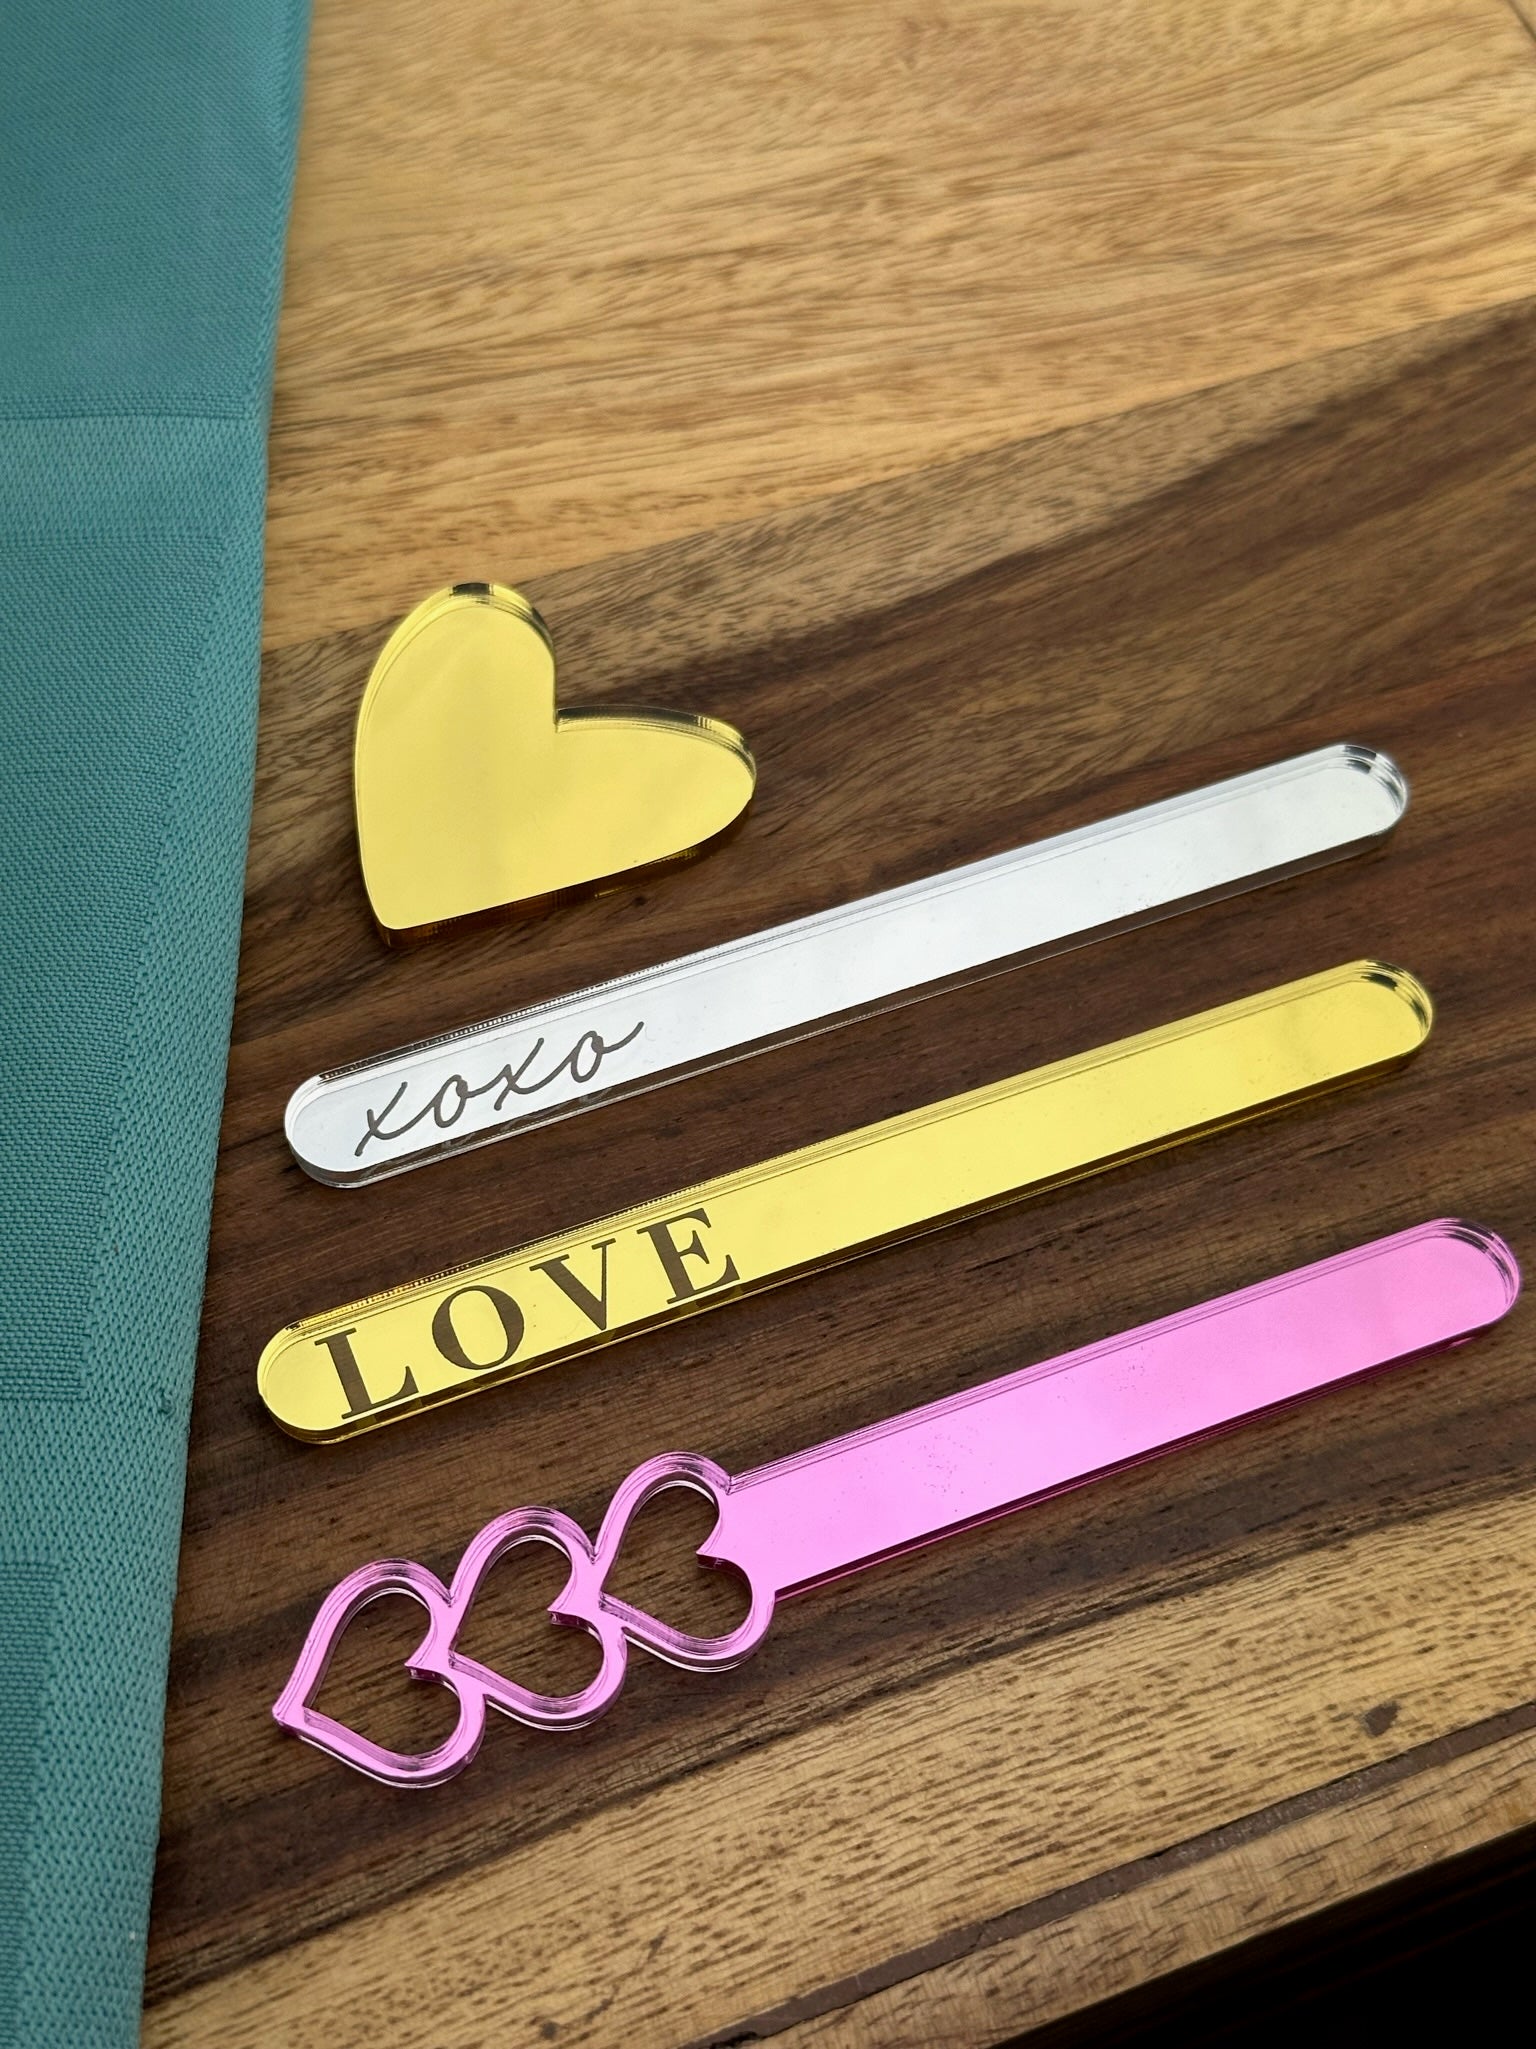 Engraved Valentine's Day Cakesicle/Popsicle Sticks (set of 12